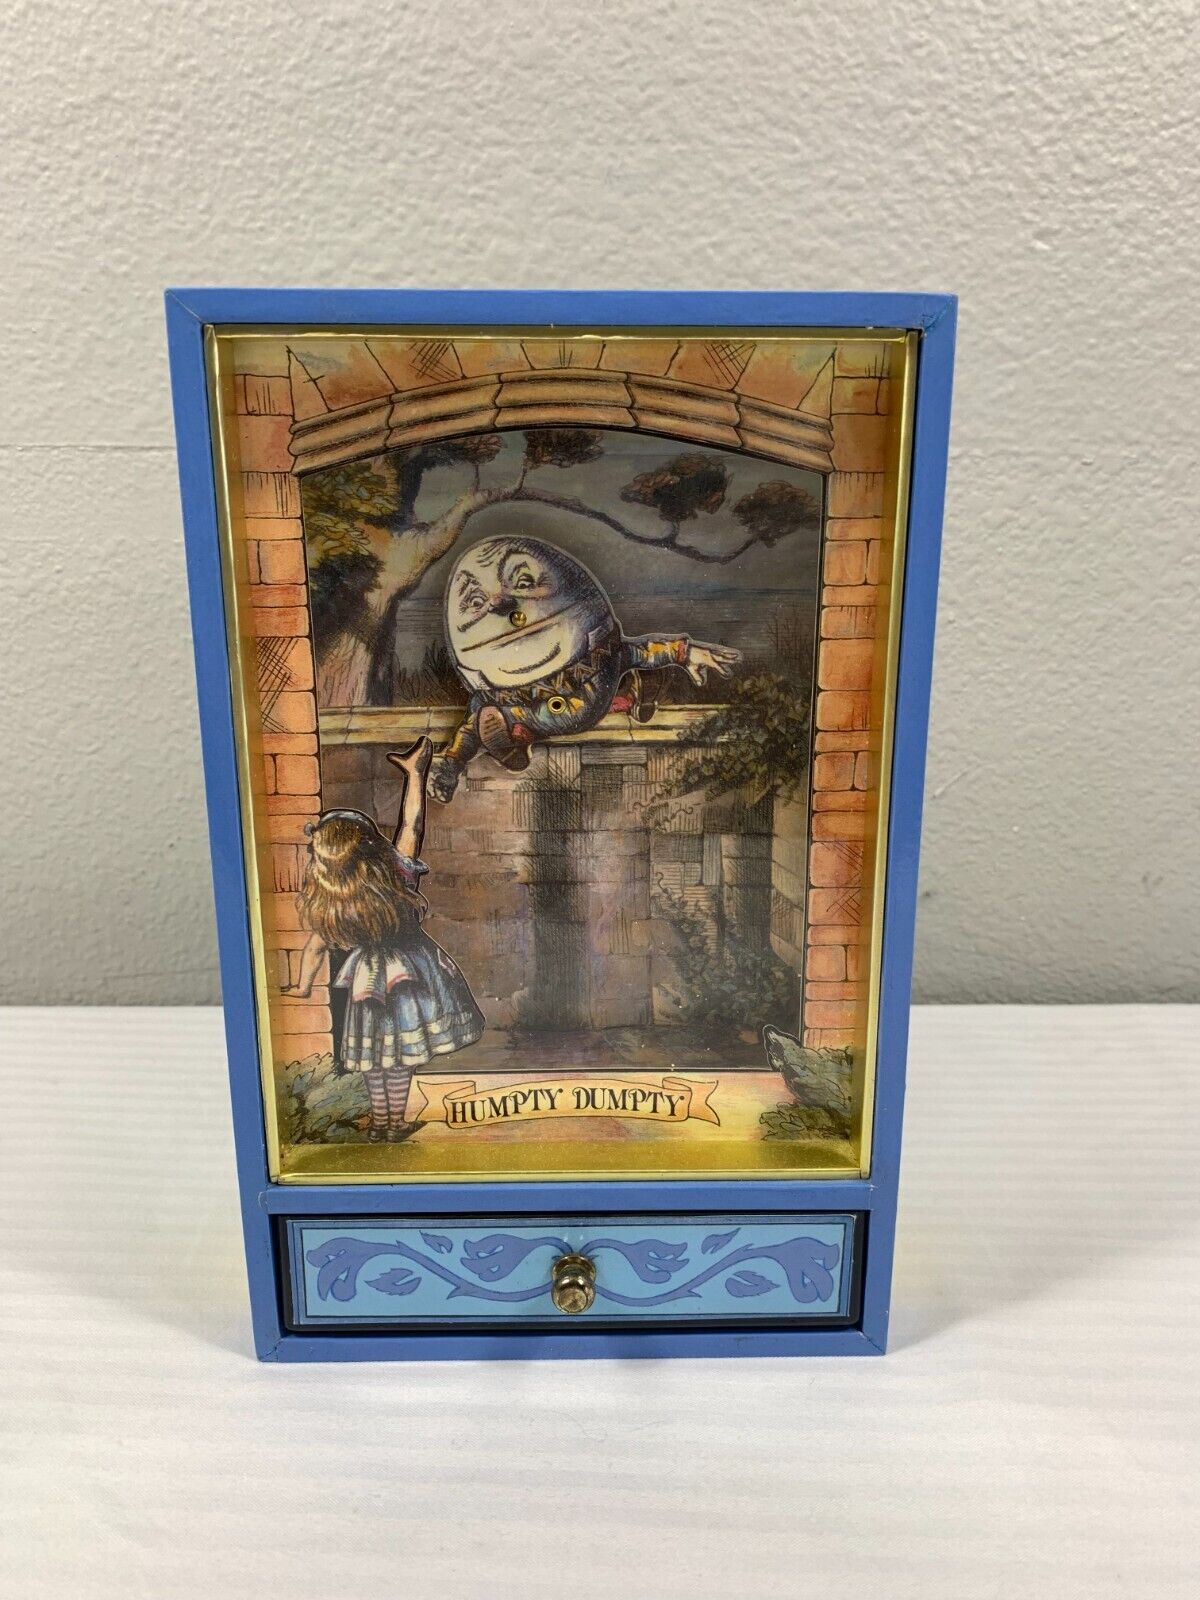 Alice in Wonderland Humpty Dumpty Motion Music Box Wind Up 43-910 Tested Working